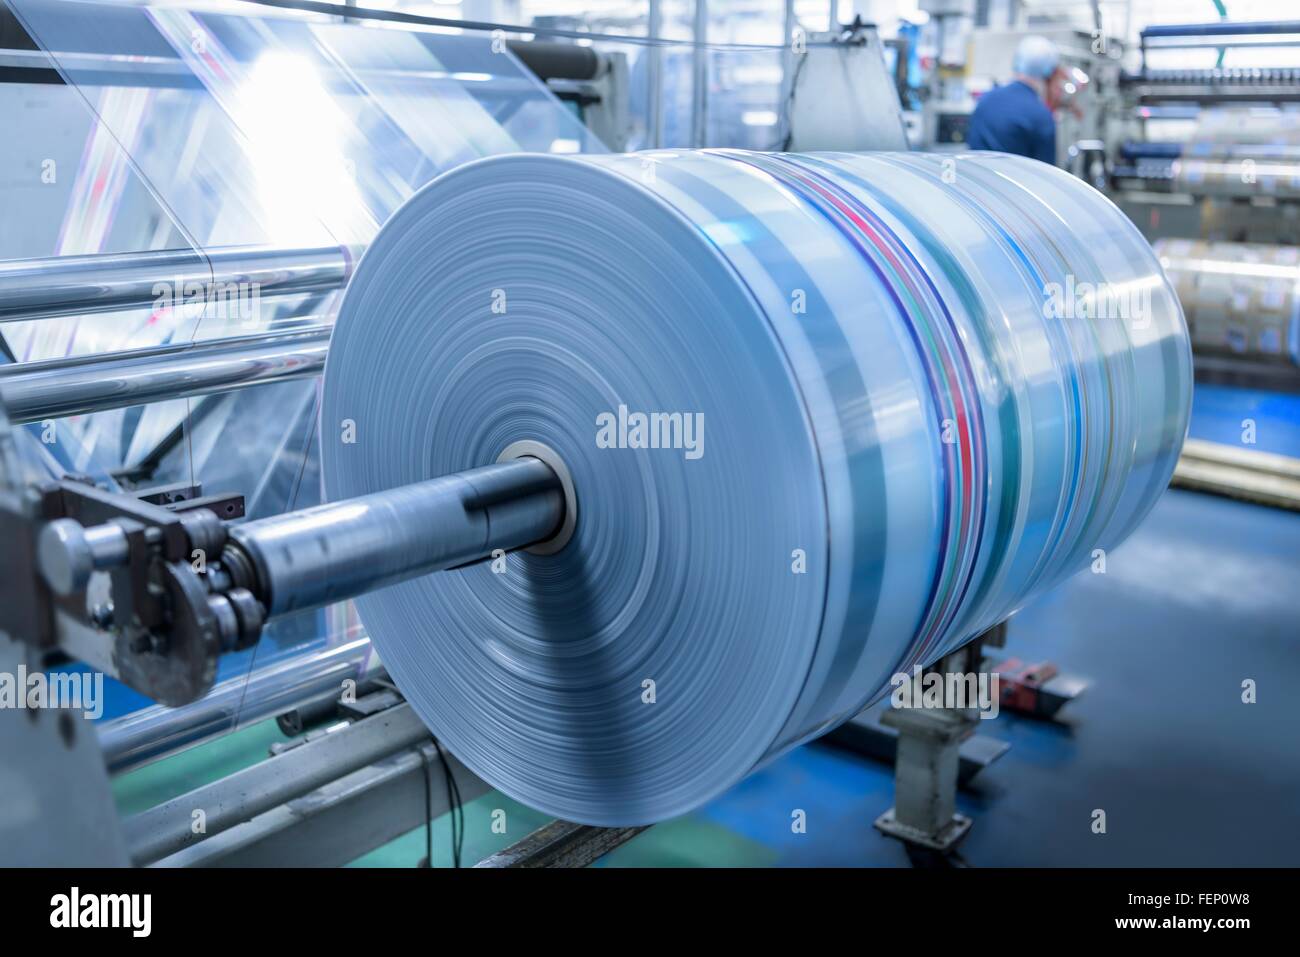 Spinning roll of printed packaging in food packaging printing factory Stock Photo